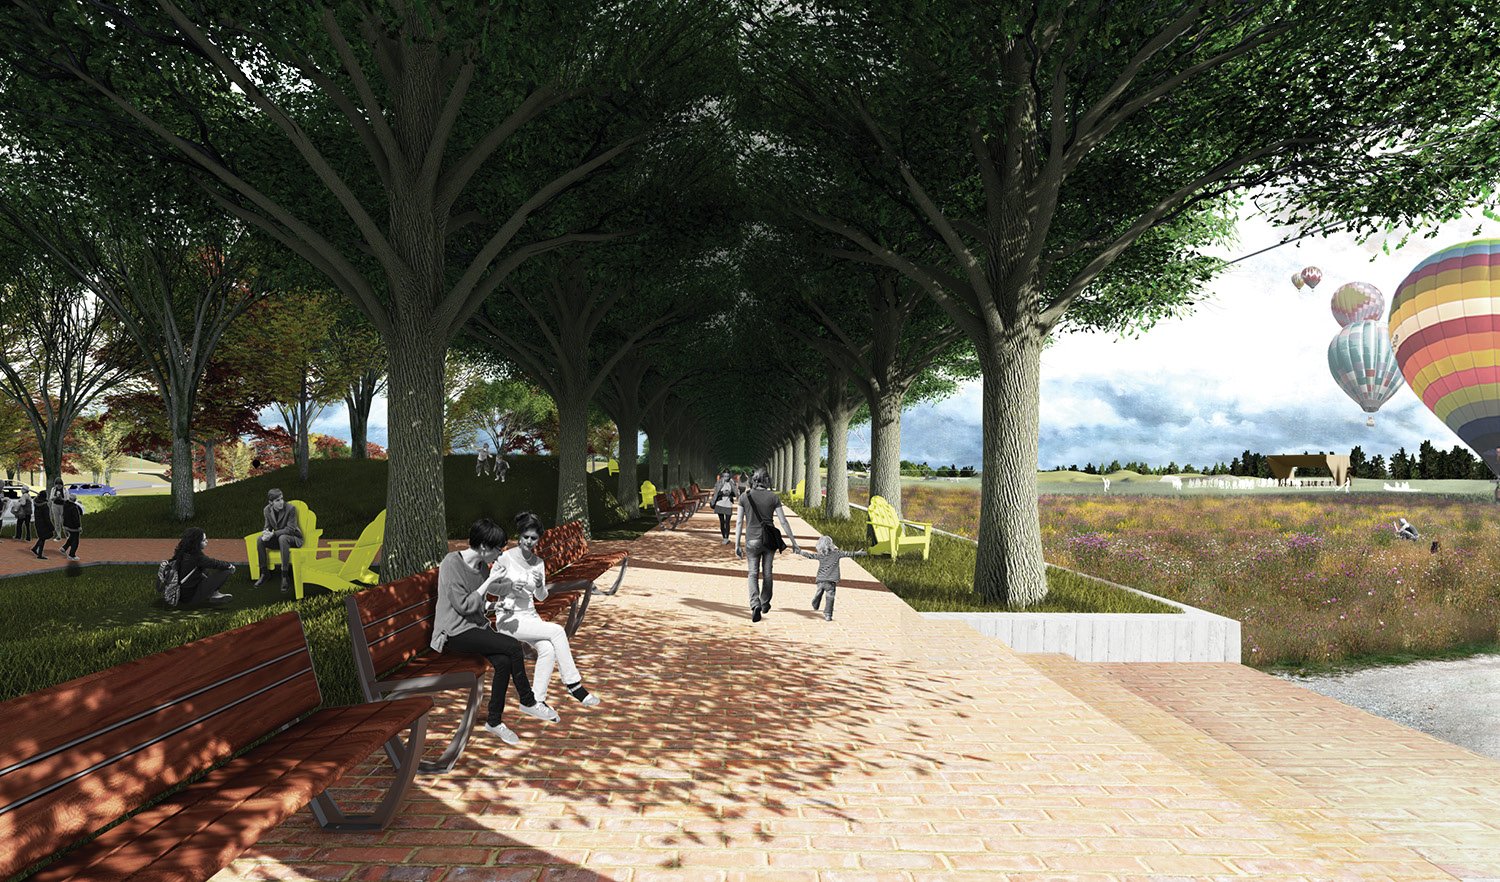 The tree-lined Concourse on the ridge connects Parking Rooms with the Upper Meadow, directing visitors to the Ravine Promenade beyond. | University of Arkansas Community Design Center